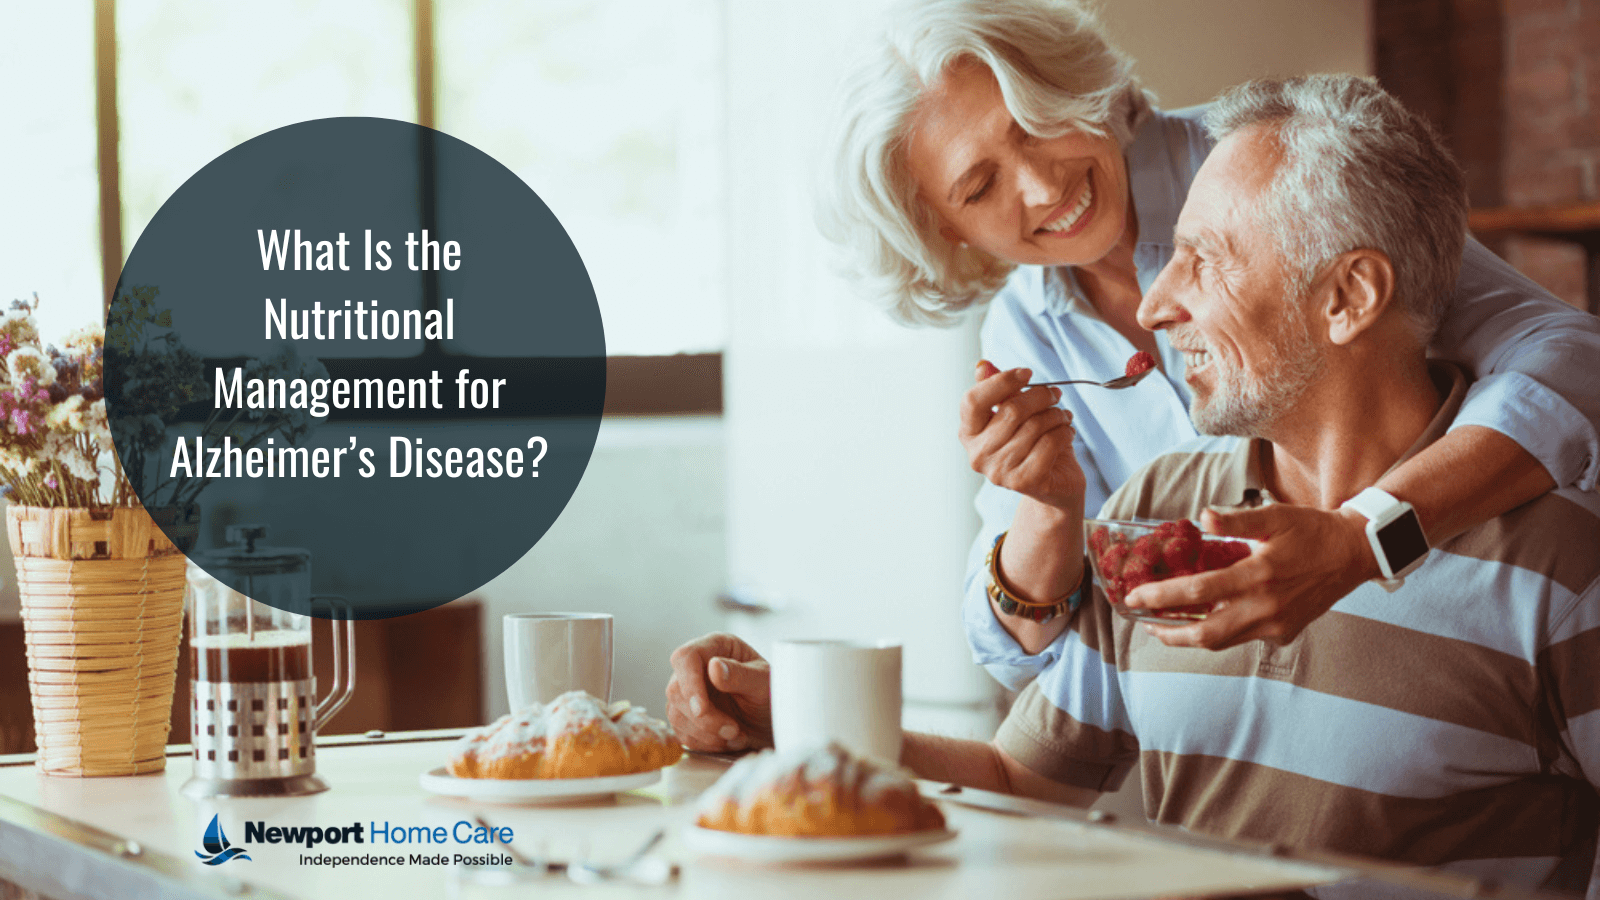 What Is the Nutritional Management for Alzheimer’s Disease?